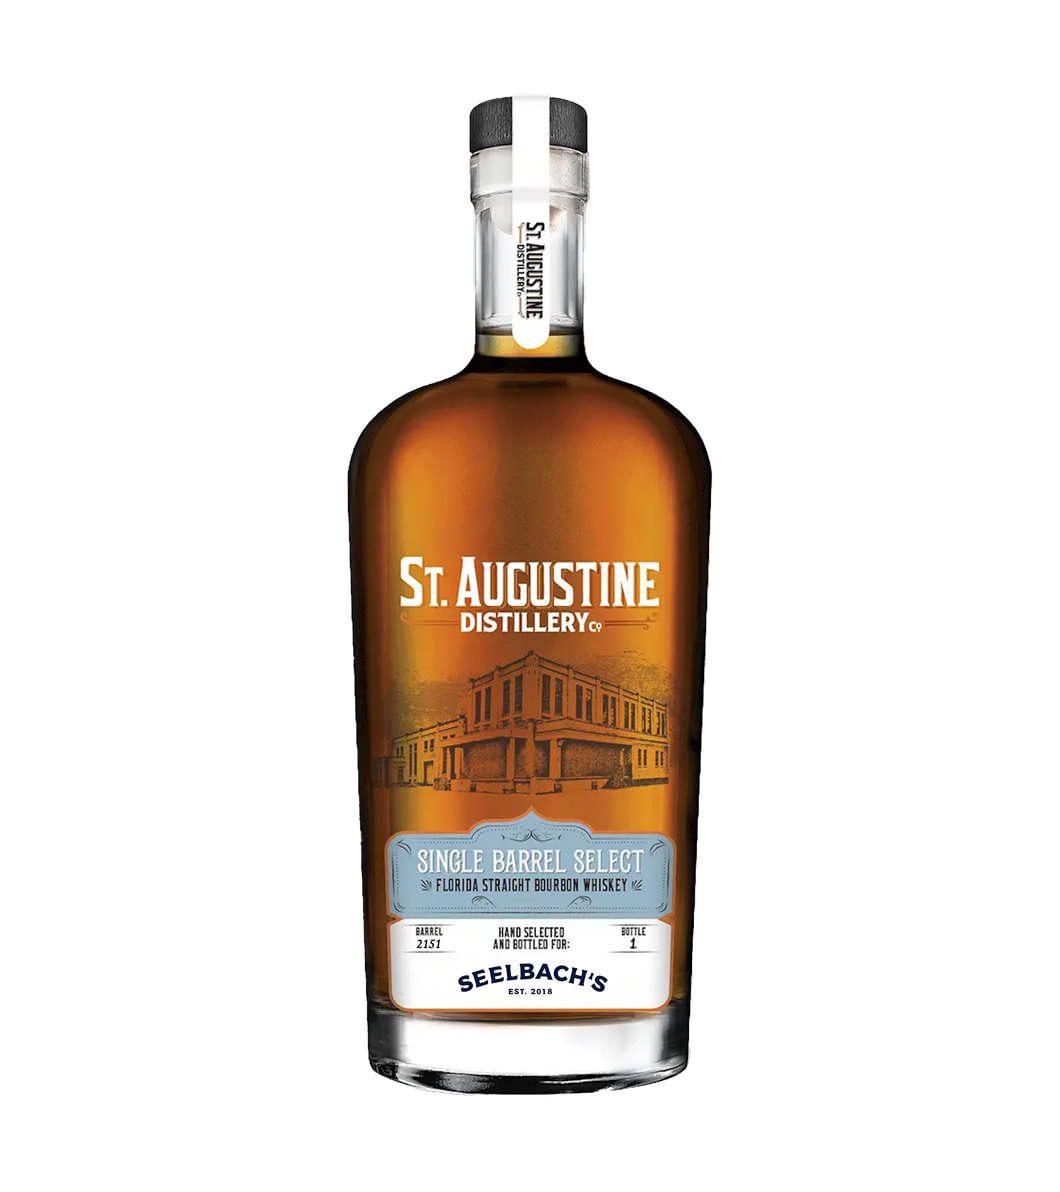 St. Augustine Distillery Single Barrel #2151 109.1 proof - Selected by Seelbach's